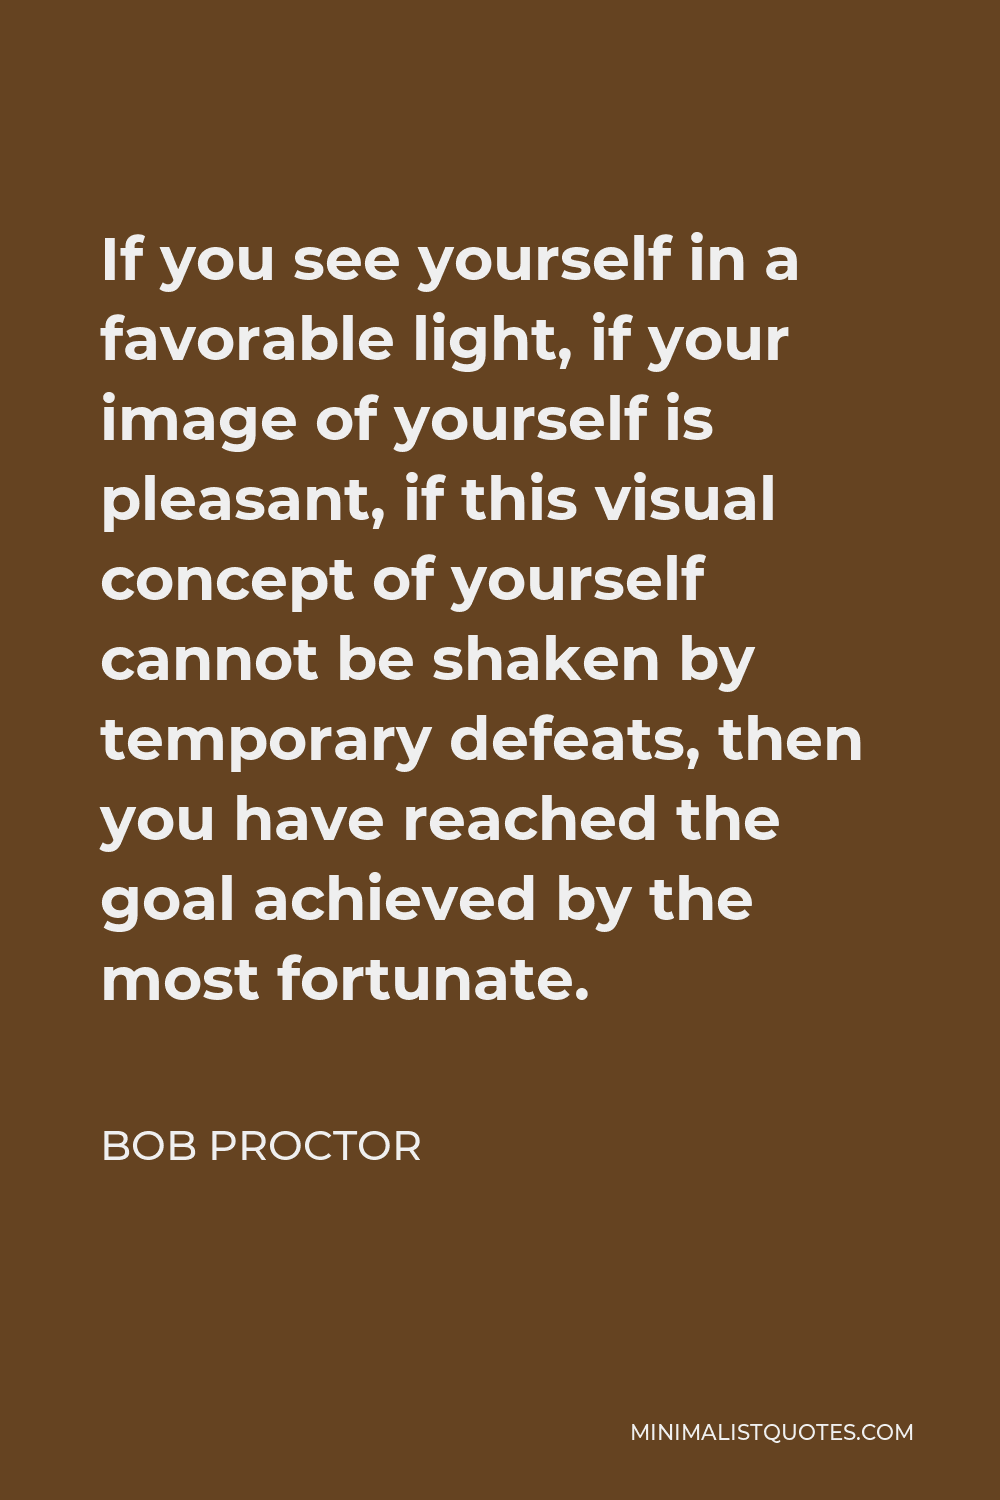 Bob Proctor Quote - If you see yourself in a favorable light, if your image of yourself is pleasant, if this visual concept of yourself cannot be shaken by temporary defeats, then you have reached the goal achieved by the most fortunate.